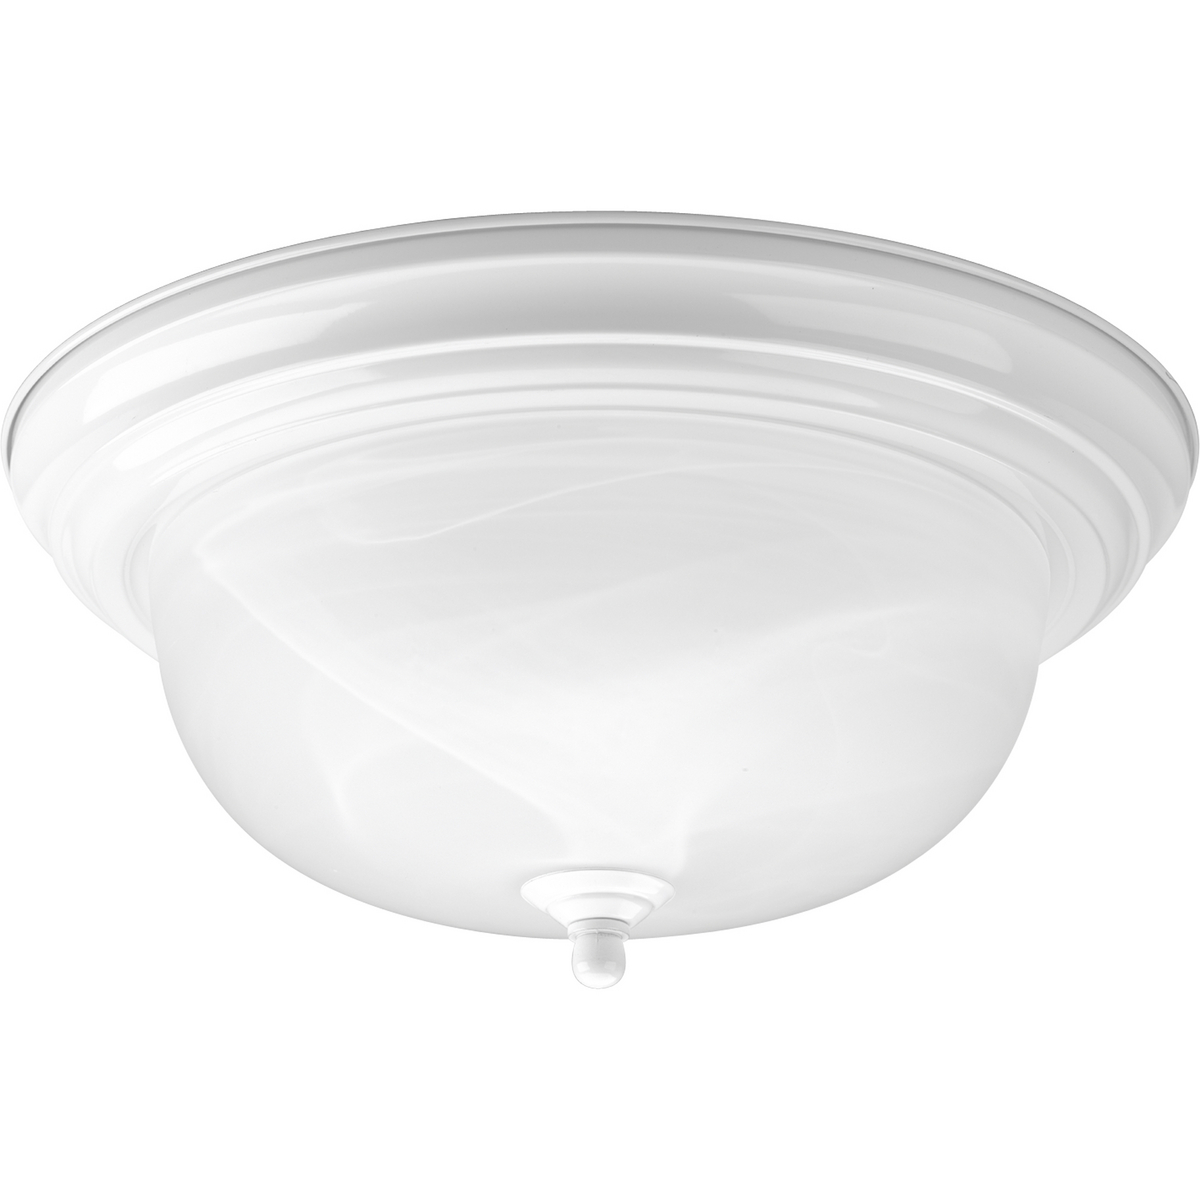 Two-light flush mount with dome shaped alabaster glass, solid trim and decorative knobs. Center lock-up with matching finial. White finish.